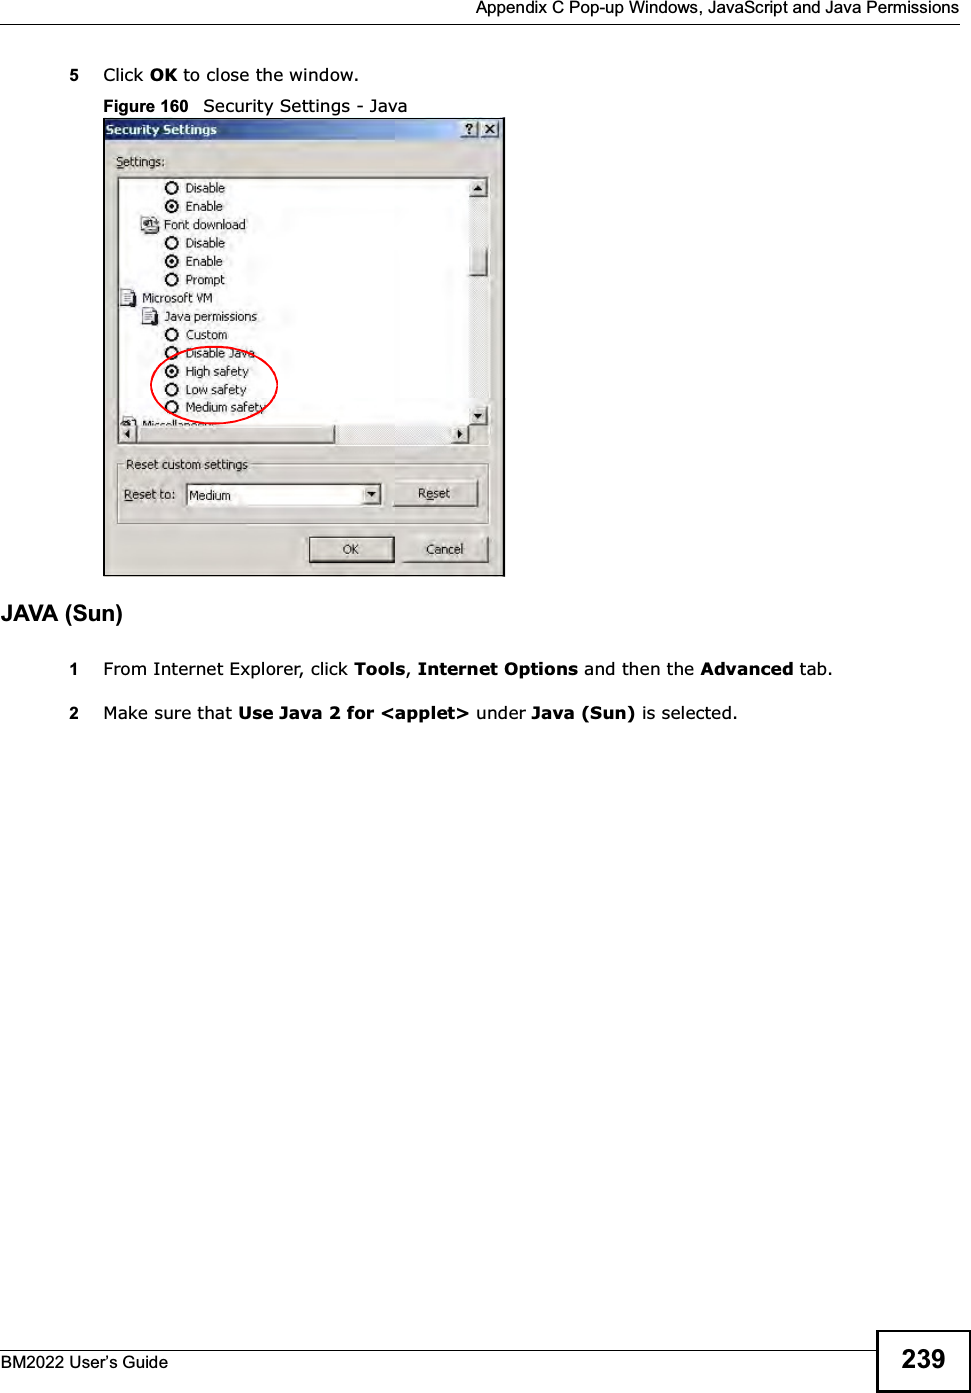  Appendix C Pop-up Windows, JavaScript and Java PermissionsBM2022 Users Guide 2395Click OK to close the window.Figure 160   Security Settings - Java JAVA (Sun)1From Internet Explorer, click Tools, Internet Options and then the Advanced tab. 2Make sure that Use Java 2 for &lt;applet&gt; under Java (Sun) is selected.